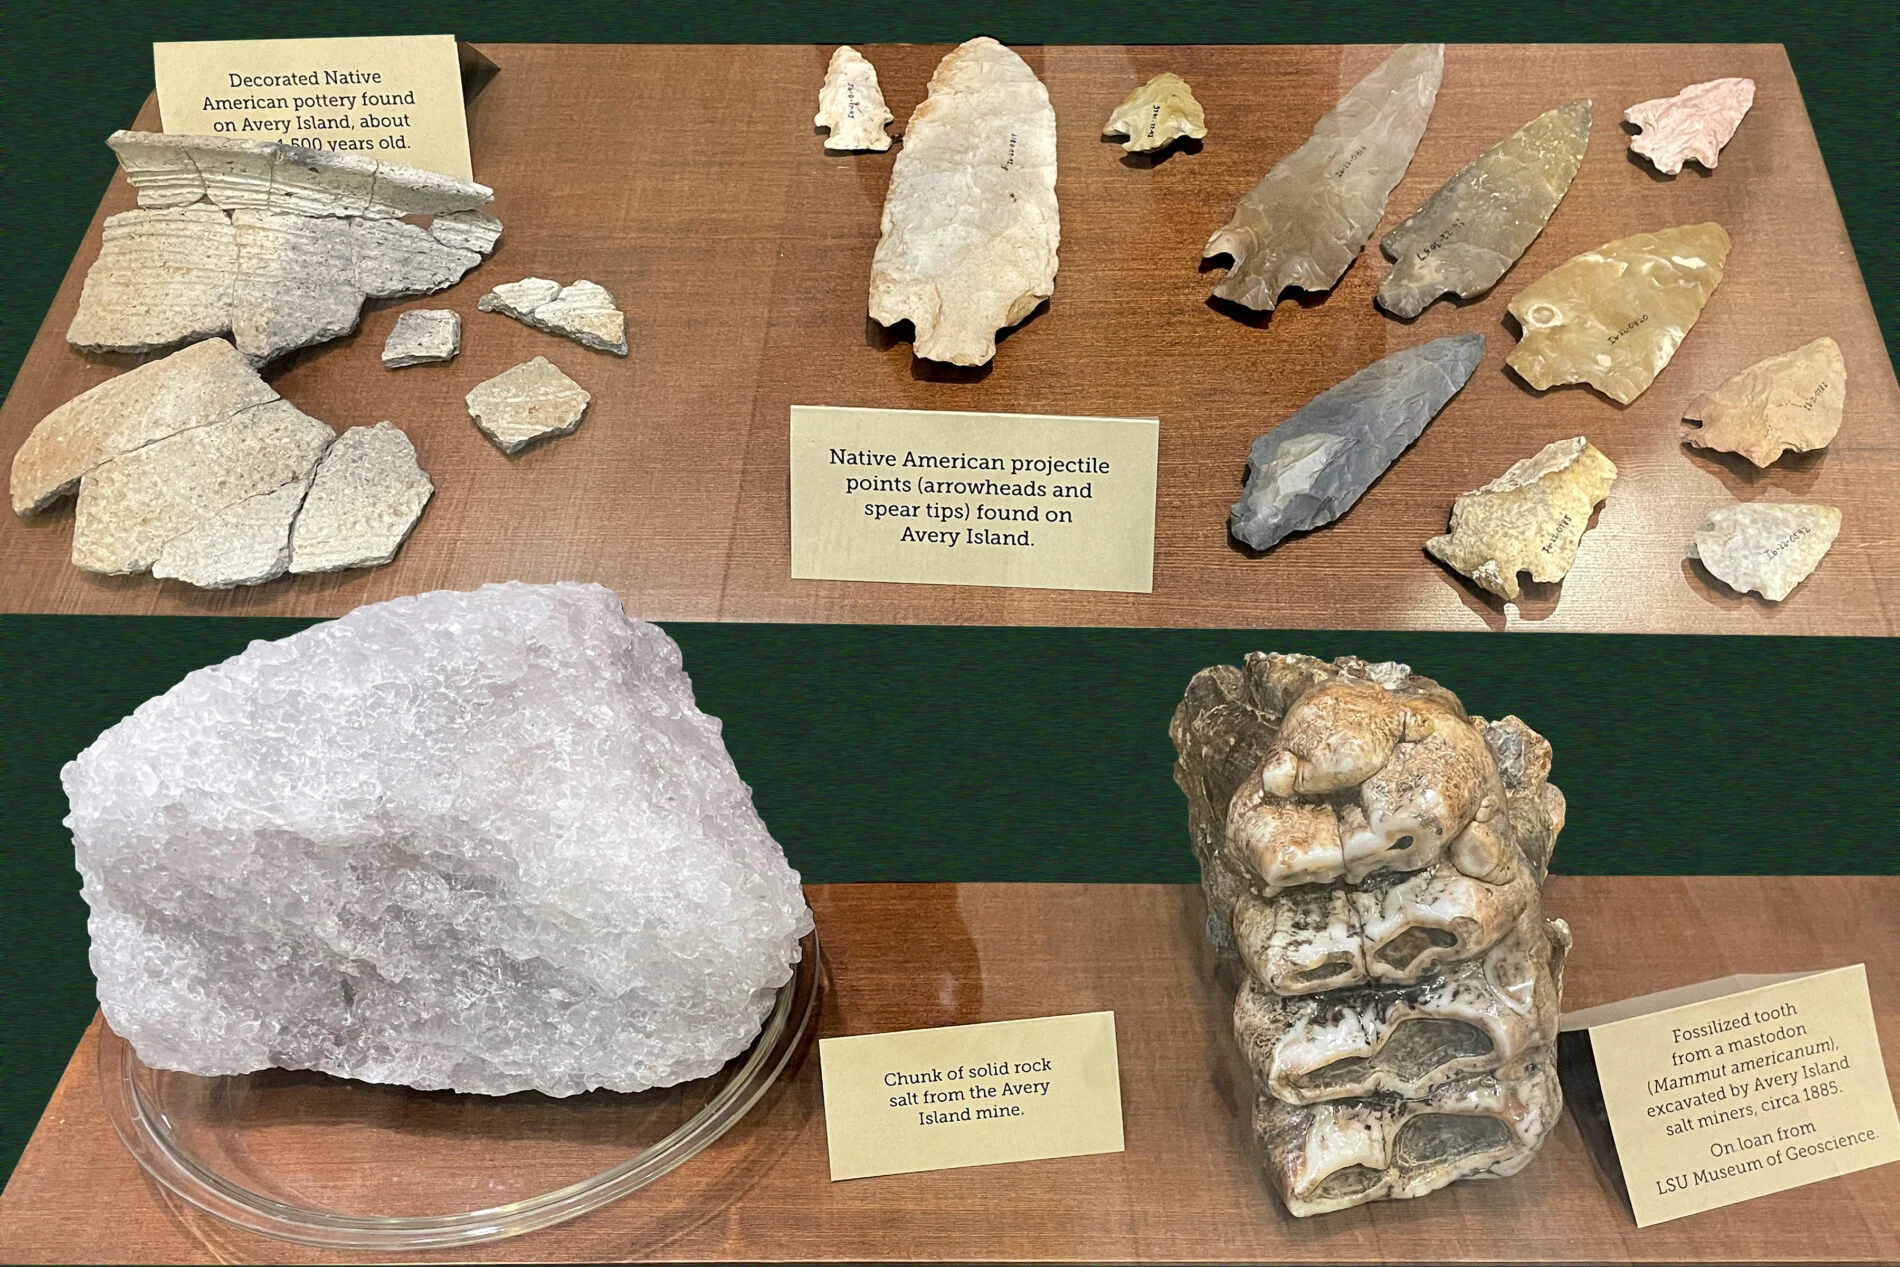 Artifacts, including a mastodon tooth and Native American arrowheads on display in the Tabasco Museum on Avery Island.